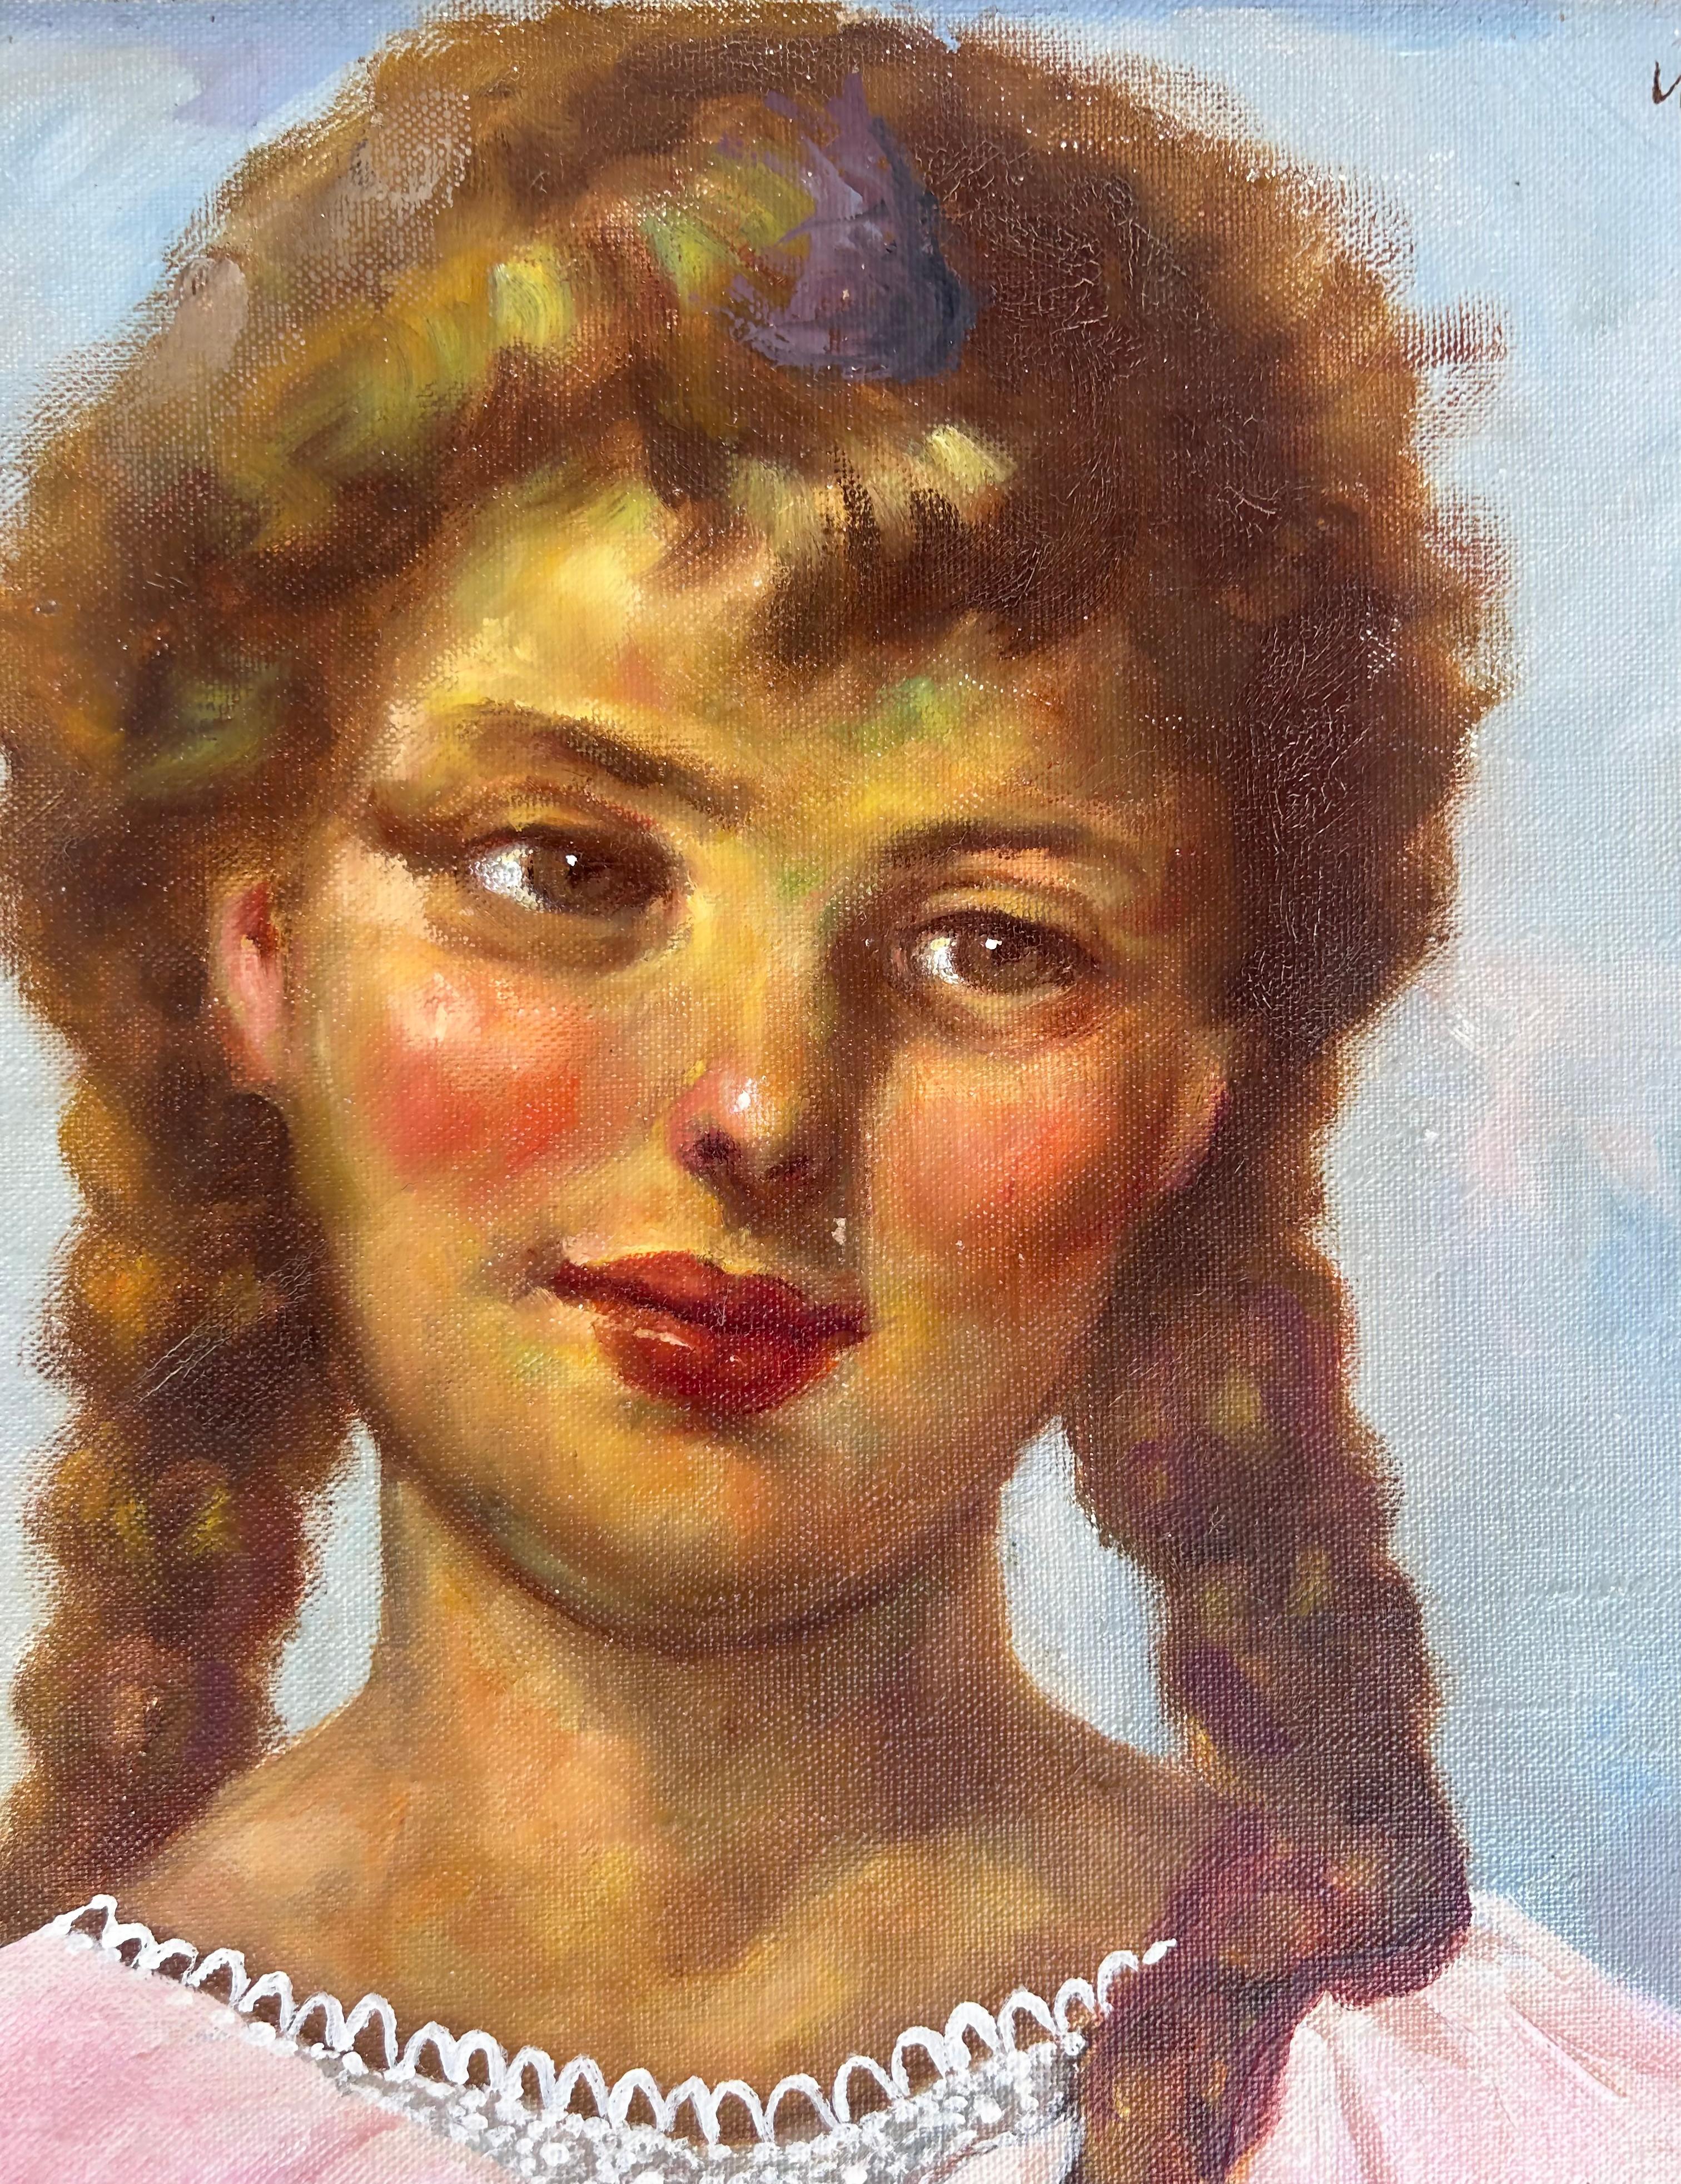  K. Naggi VIntage Illustration Oil Painting, Girl with Pigtails 


Offered for sale is a vintage portrait of a girl with braids holding an apple. The painting is signed in the upper right K. Naggi. The work is painted in an illustration style. The